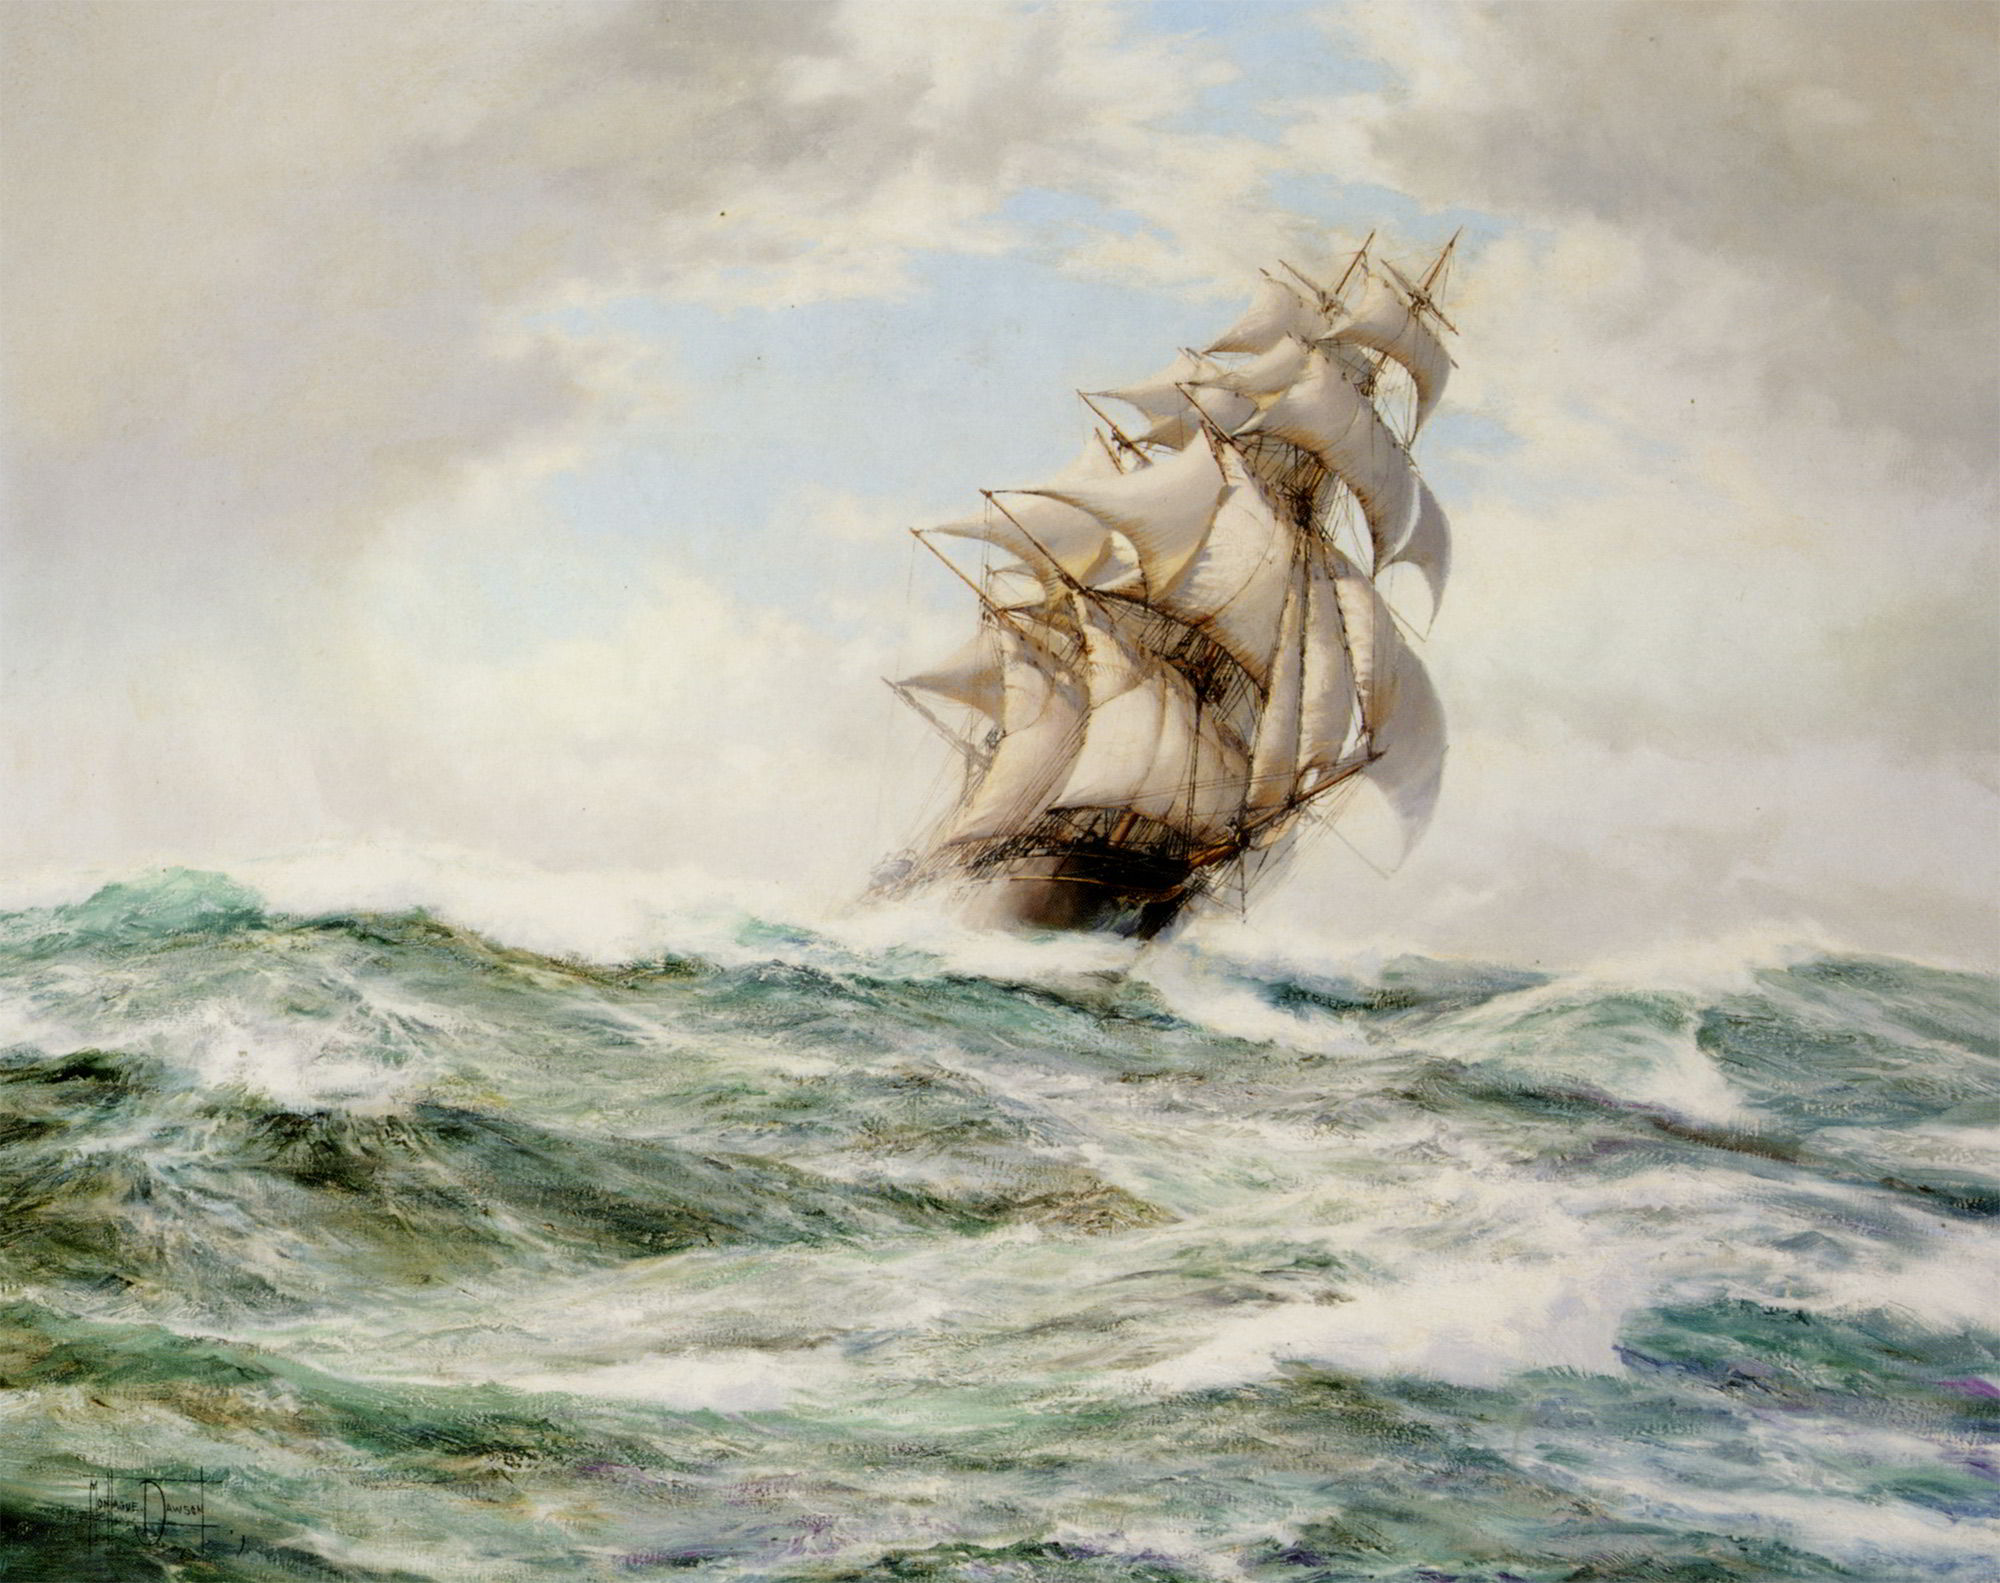 The Sweep Stakers Driving Hard by Montague Dawson